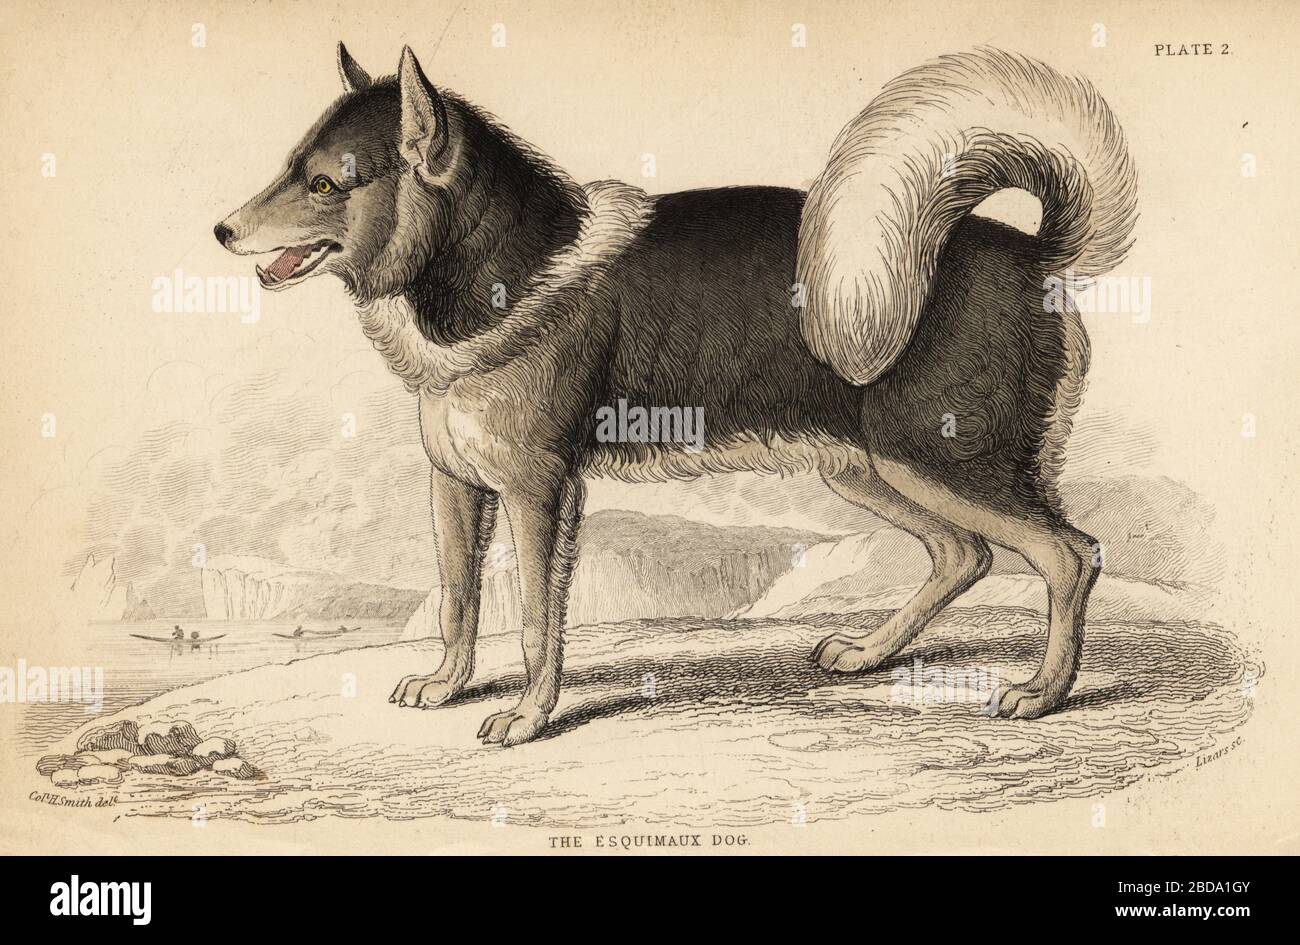 Canadian eskimo dog or qimmiq, Canis lupus familiaris. Endangered. (The Esquimaux dog, Canis borealis). Inuit men in canoes in the background. Handcoloured steel engraving by William Lizars from a drawing by Colonel Charles Hamilton Smith from his volume on Dogs from Sir William Jardine's Naturalist's Library: Mammalia, W. H. Lizars, Edinburgh, 1840. Stock Photo